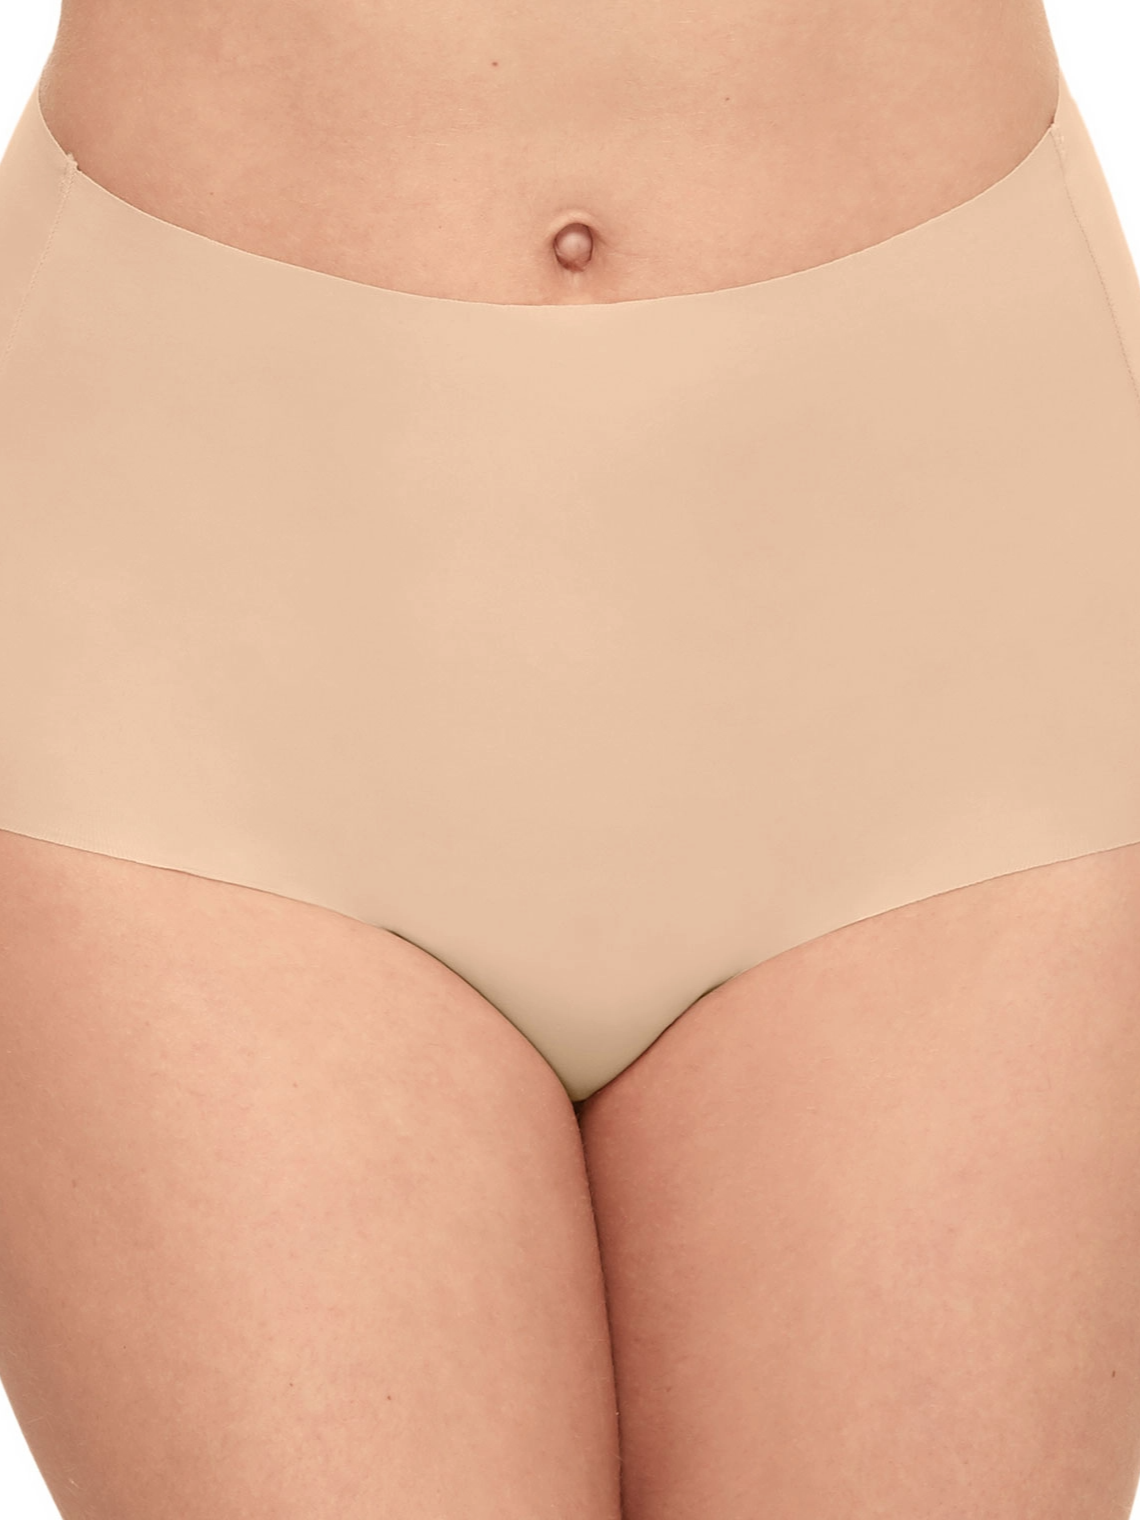 Wacoal - 870443 Flawless Comfort Brief, 2 colours